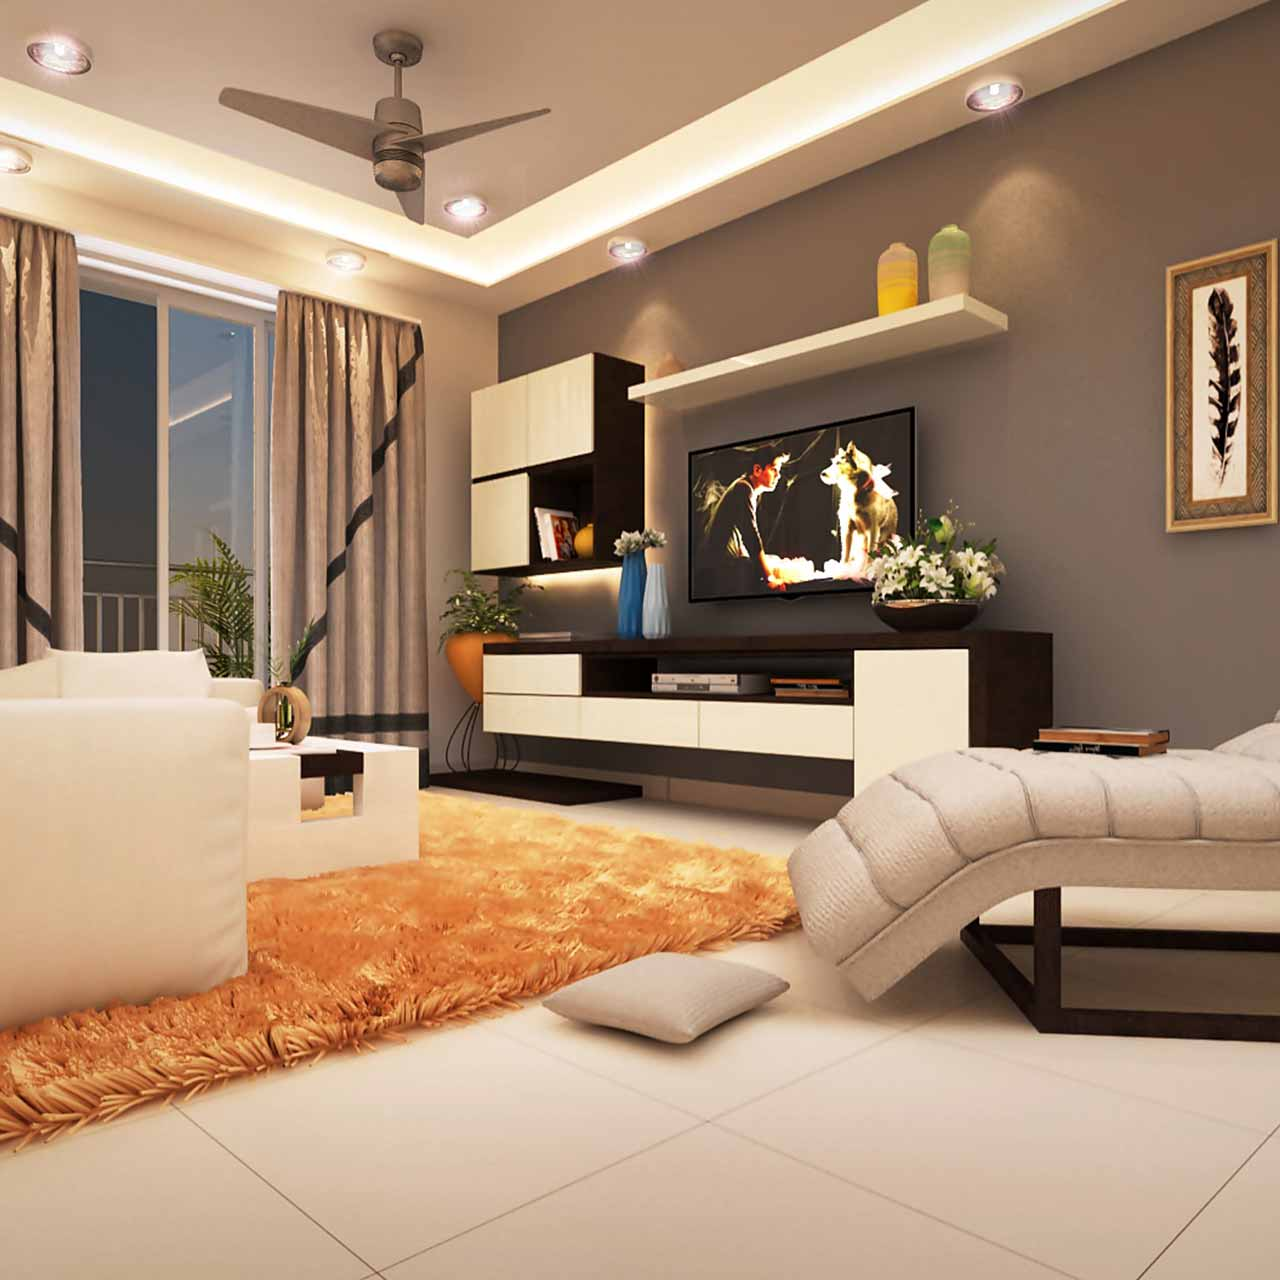 Living room interior design: All you need to know 